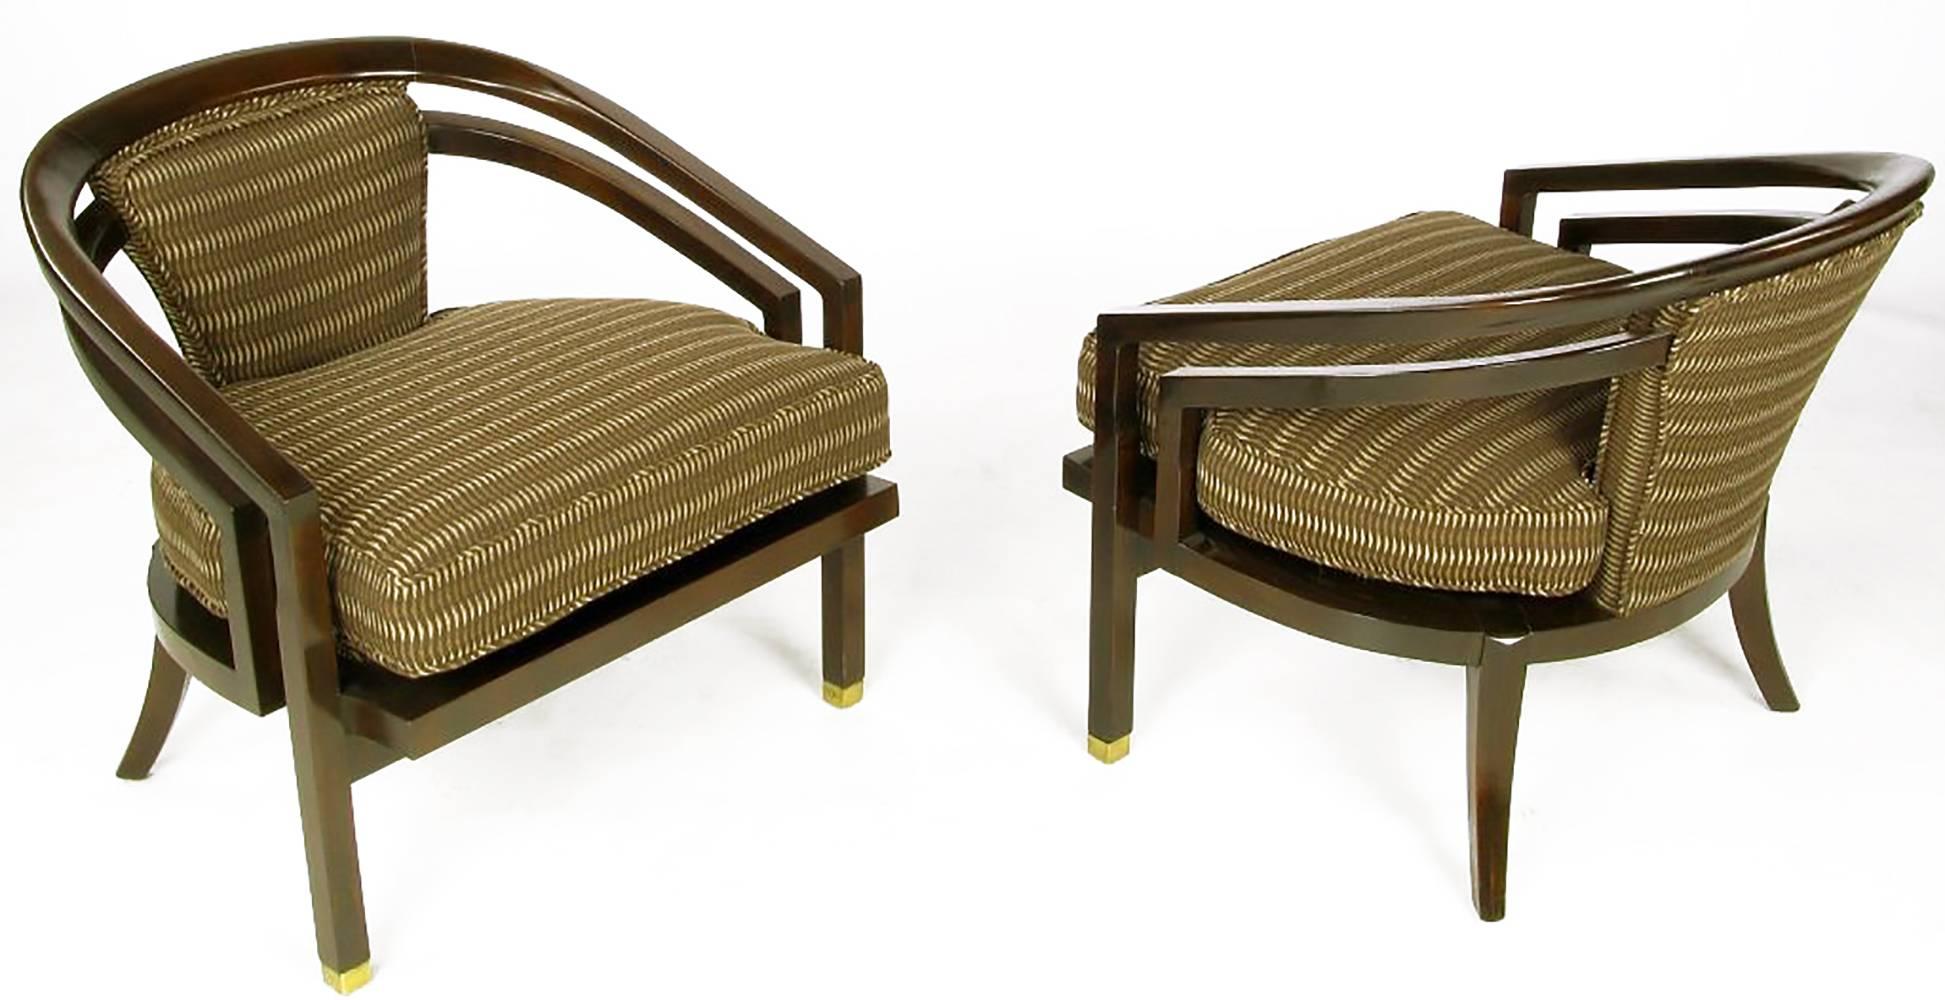 Elegant and sophisticated, this pair of art deco inspired club chairs, often misattributed to Harvey Probber, have been completely restored from the ground up. Refinished to match the original dark wood and reupholstered in a chocolate brown, cocoa